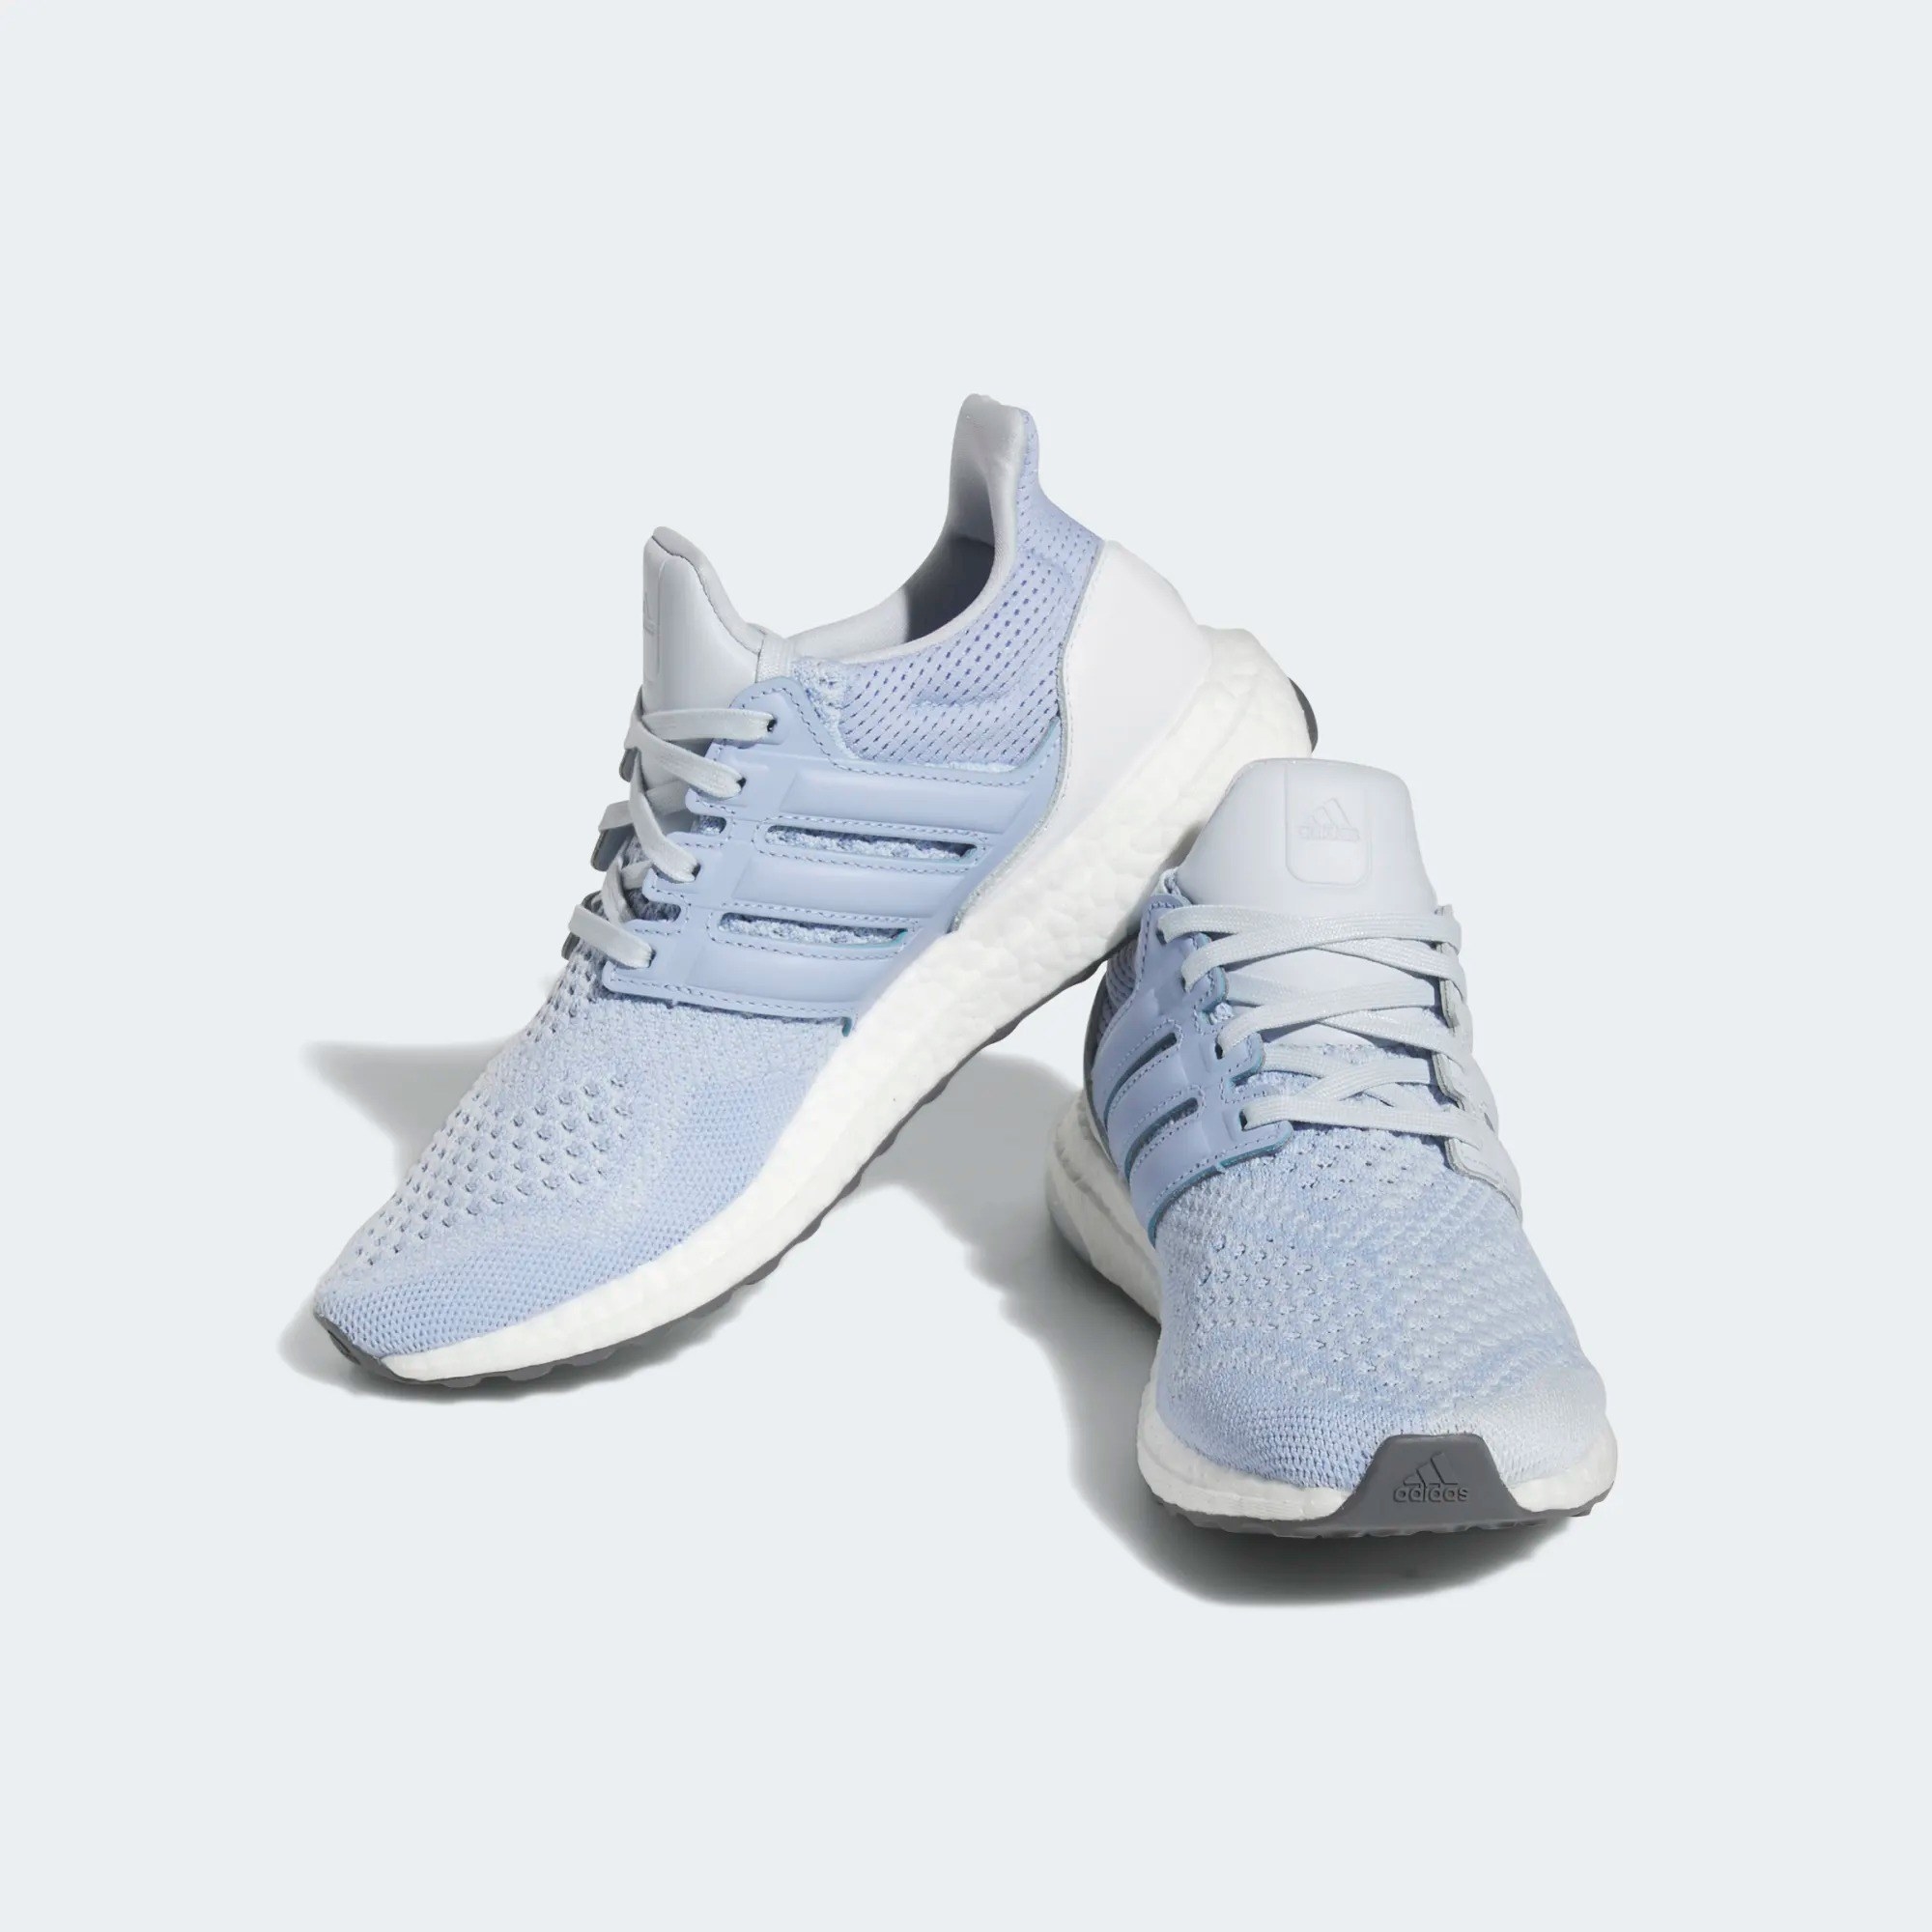 a pair of light blue adidas sneakers